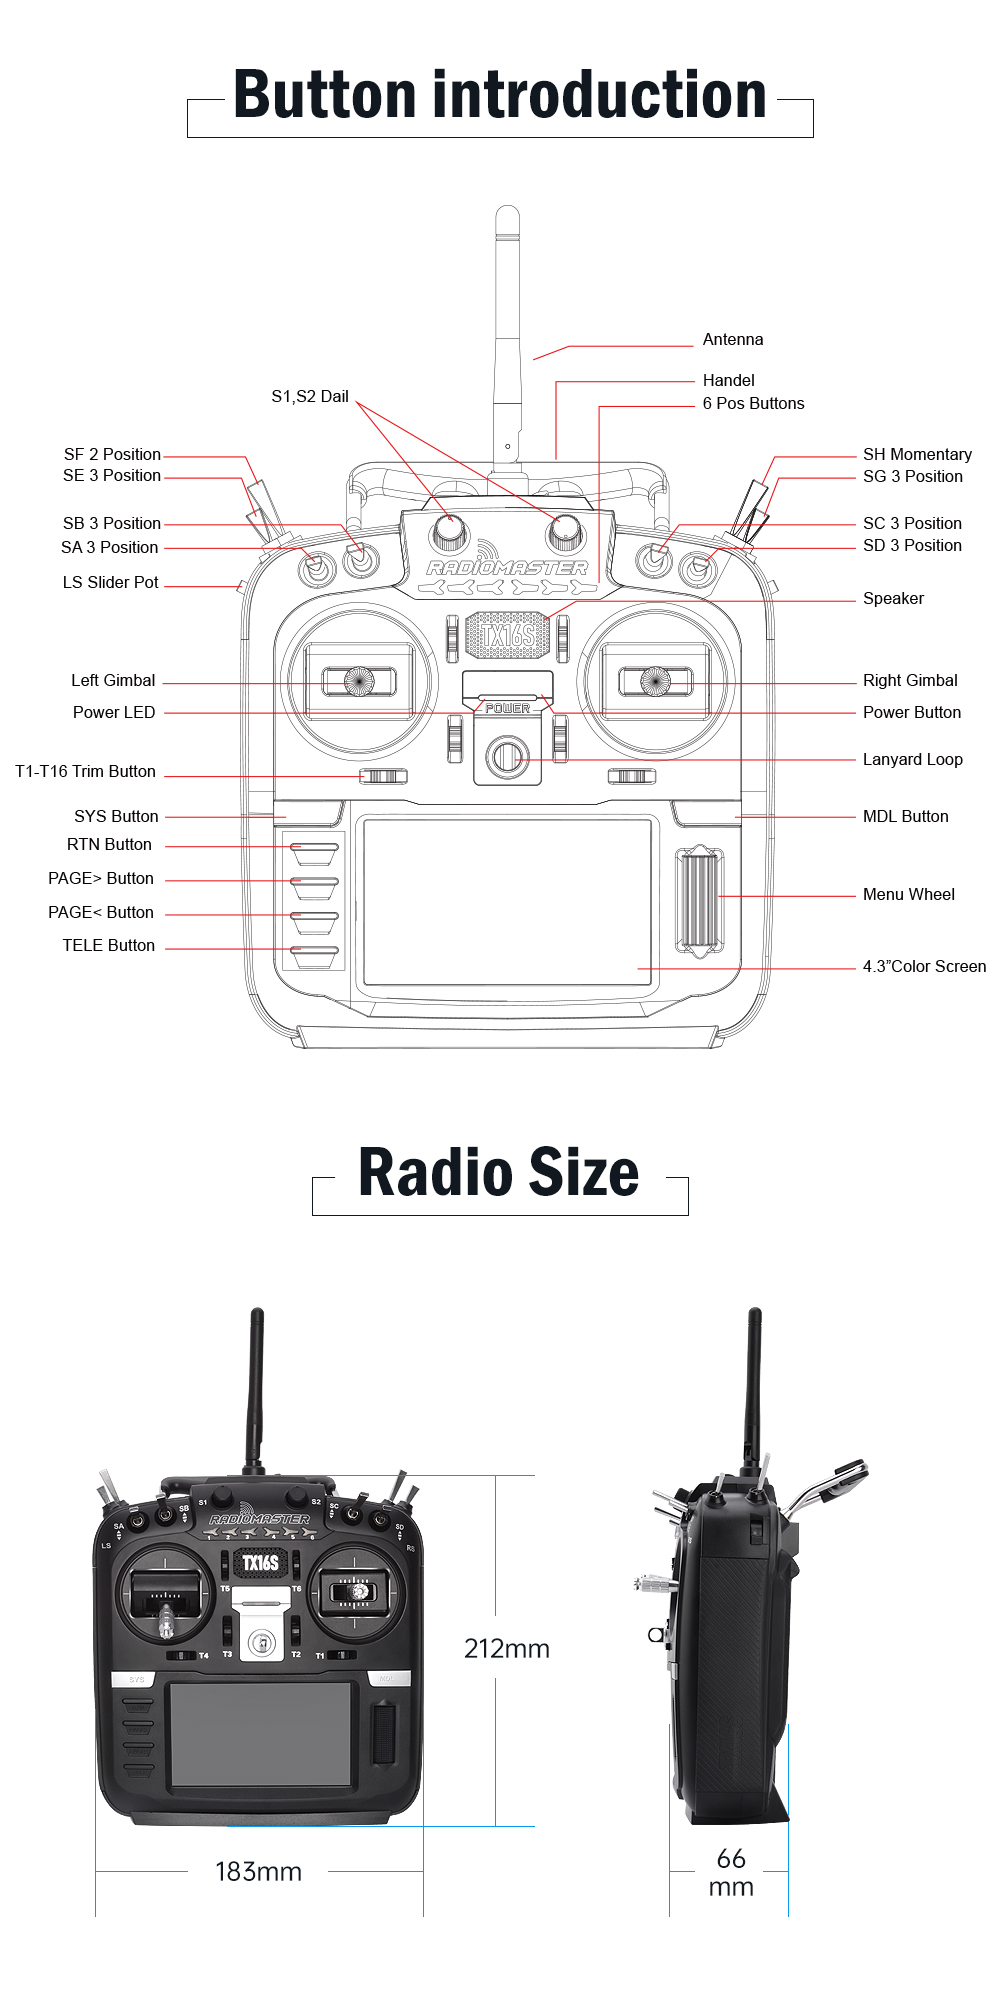 RadioMaster TX16S Hall Sensor Gimbals 2.4G 16CH Multi-protocol RF System OpenTX Mode2 Transmitter for RC Drone 34